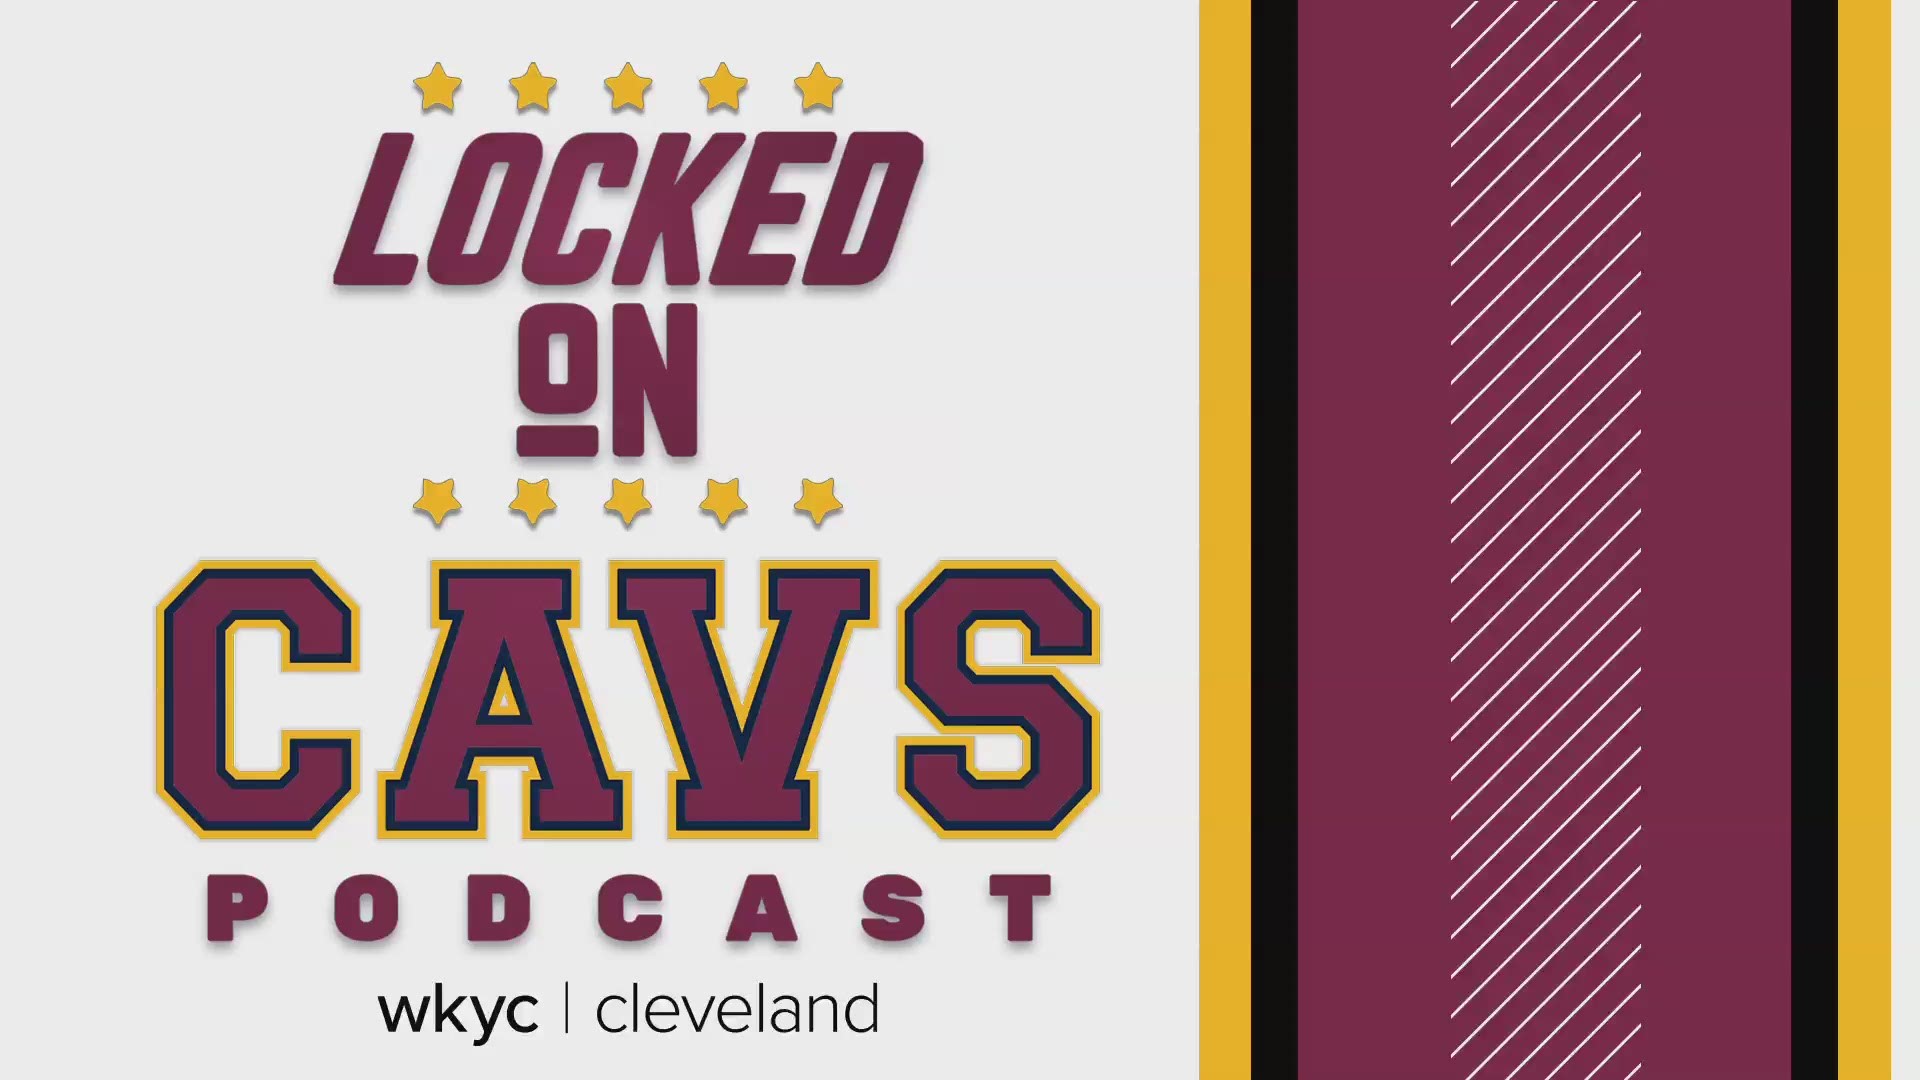 Chris Manning and Evan Dammarell are joined by the hosts of Locked On Bulls for a discussion about the state of the two teams.